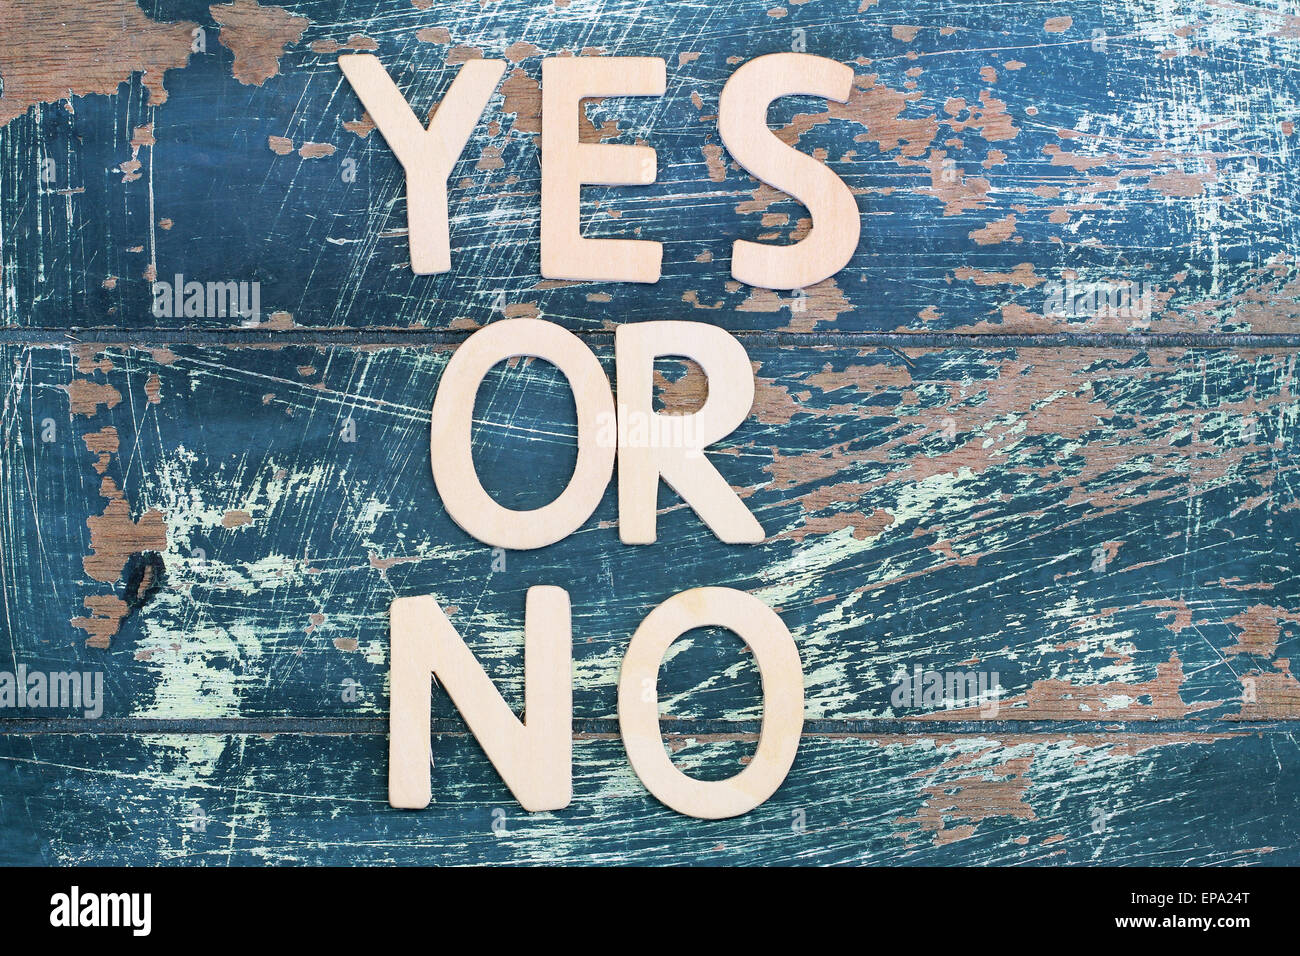 Yes or no written with wooden letters on rustic wooden surface Stock Photo